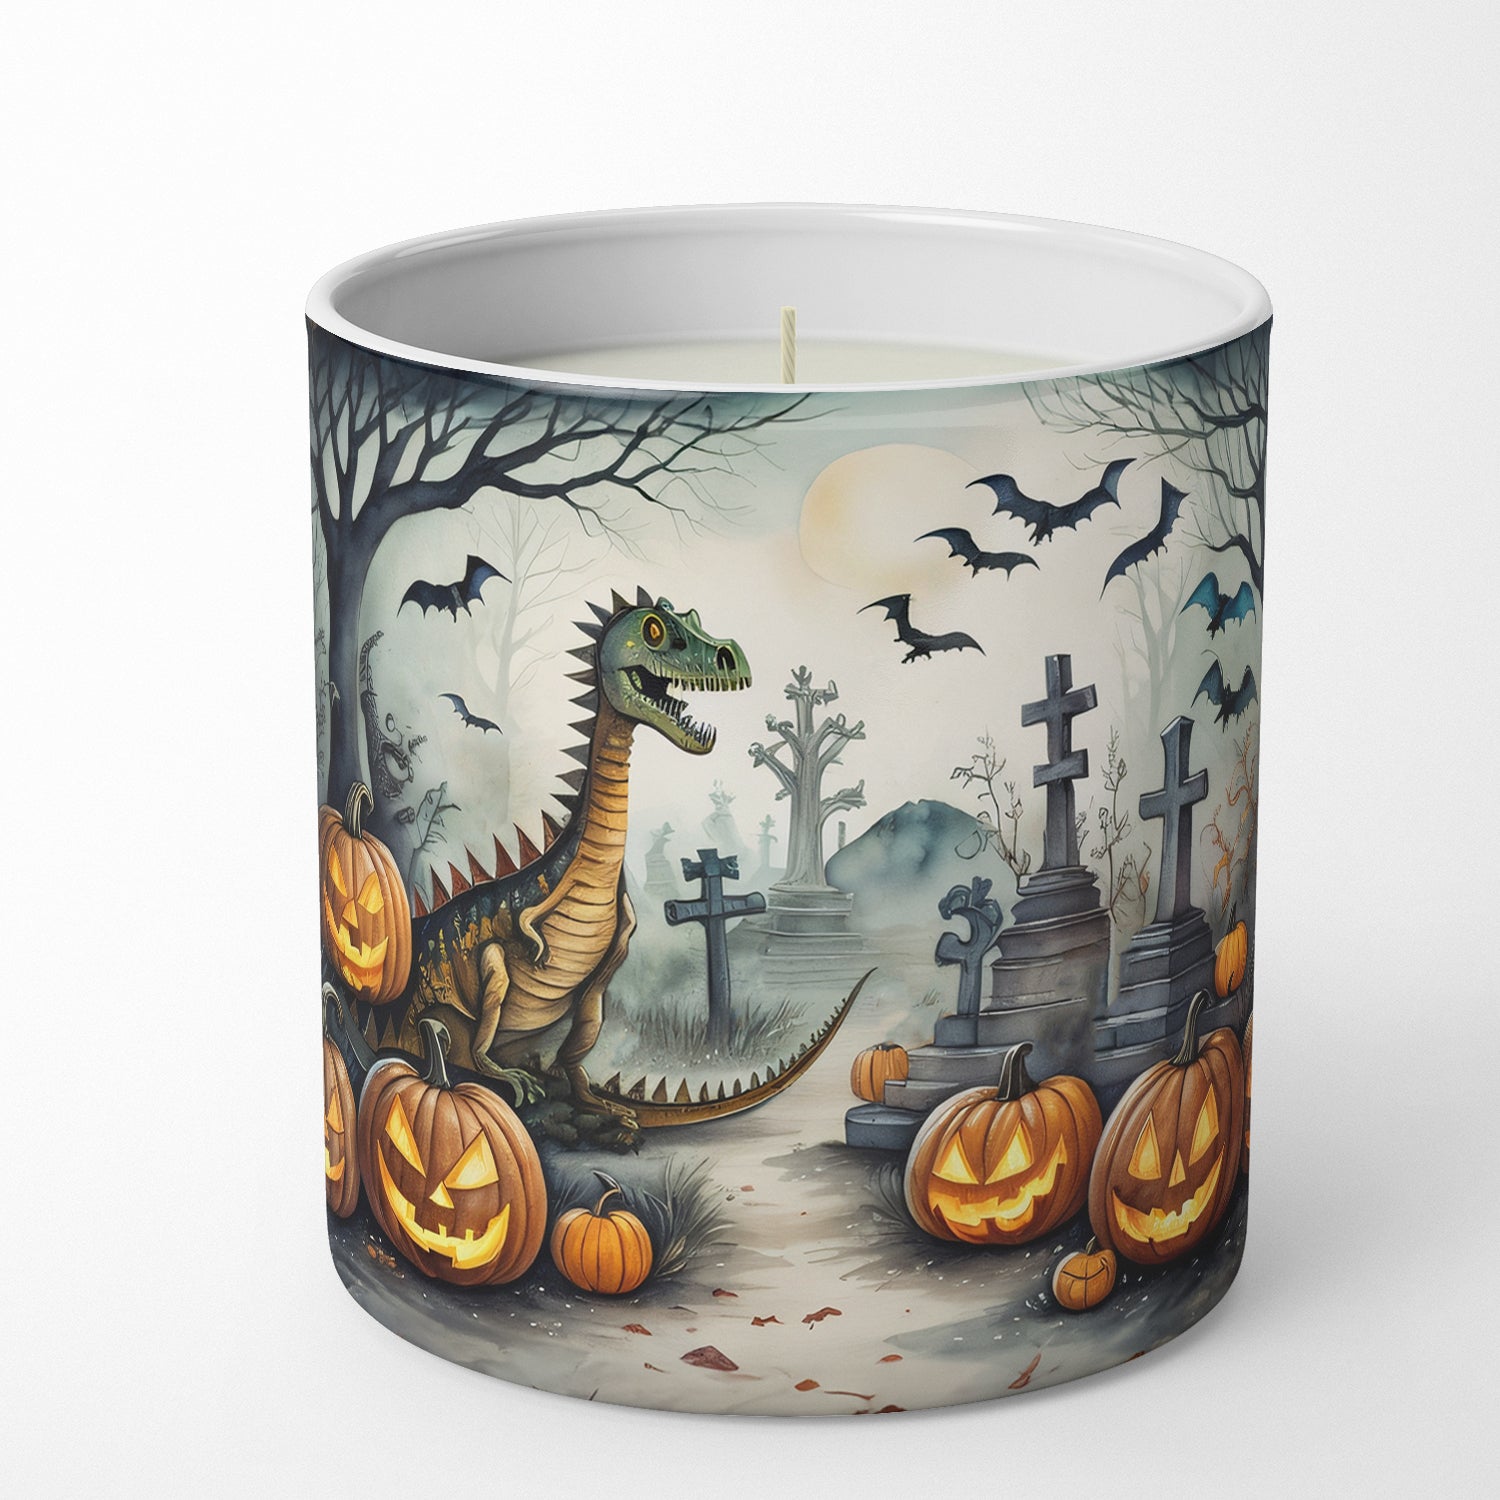 Buy this Dinosaurs Spooky Halloween Decorative Soy Candle